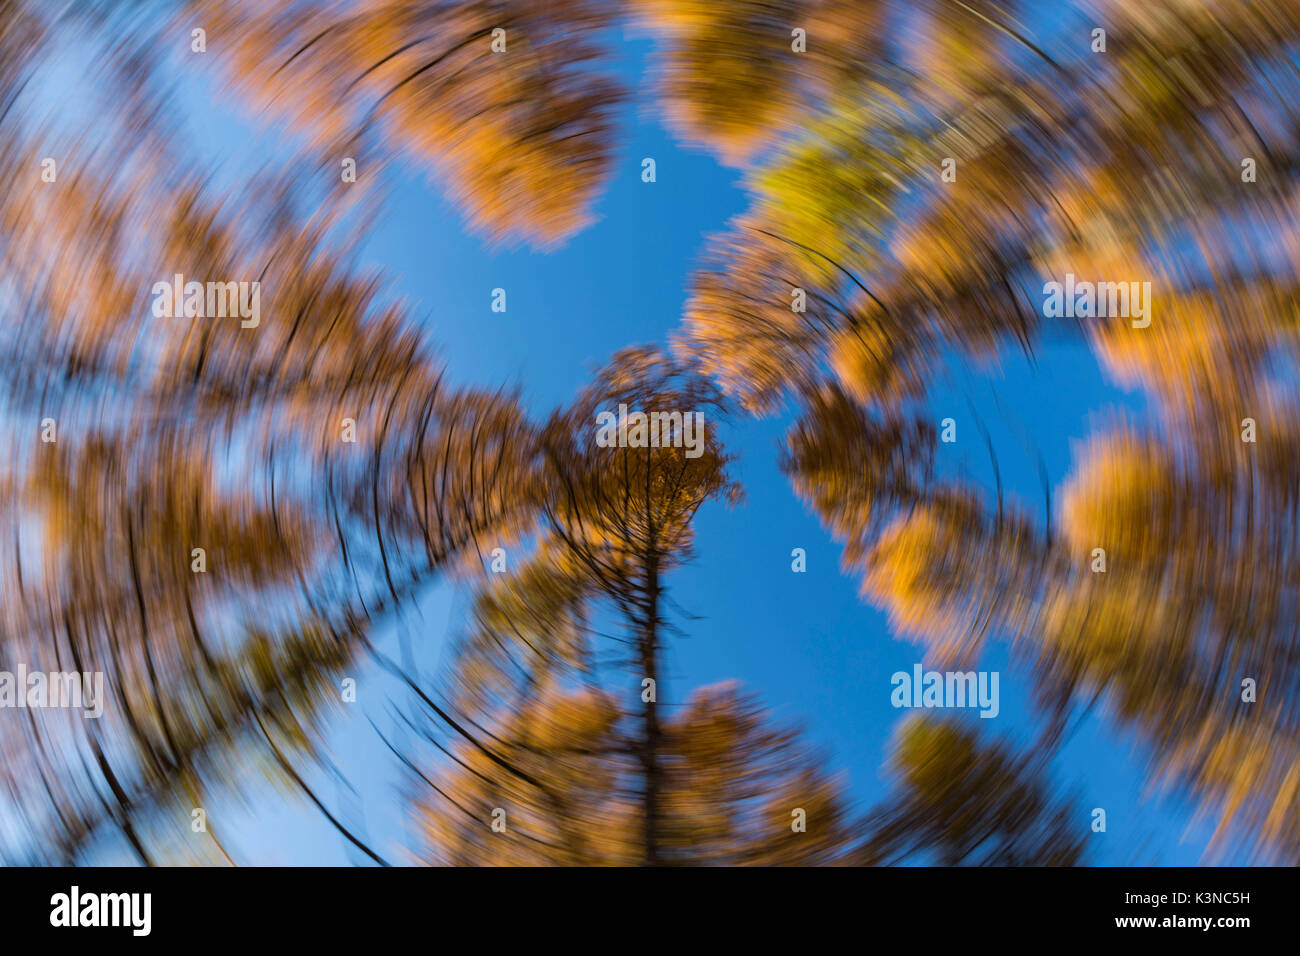 Swirling autumnal trees. Italy, Europe. Stock Photo